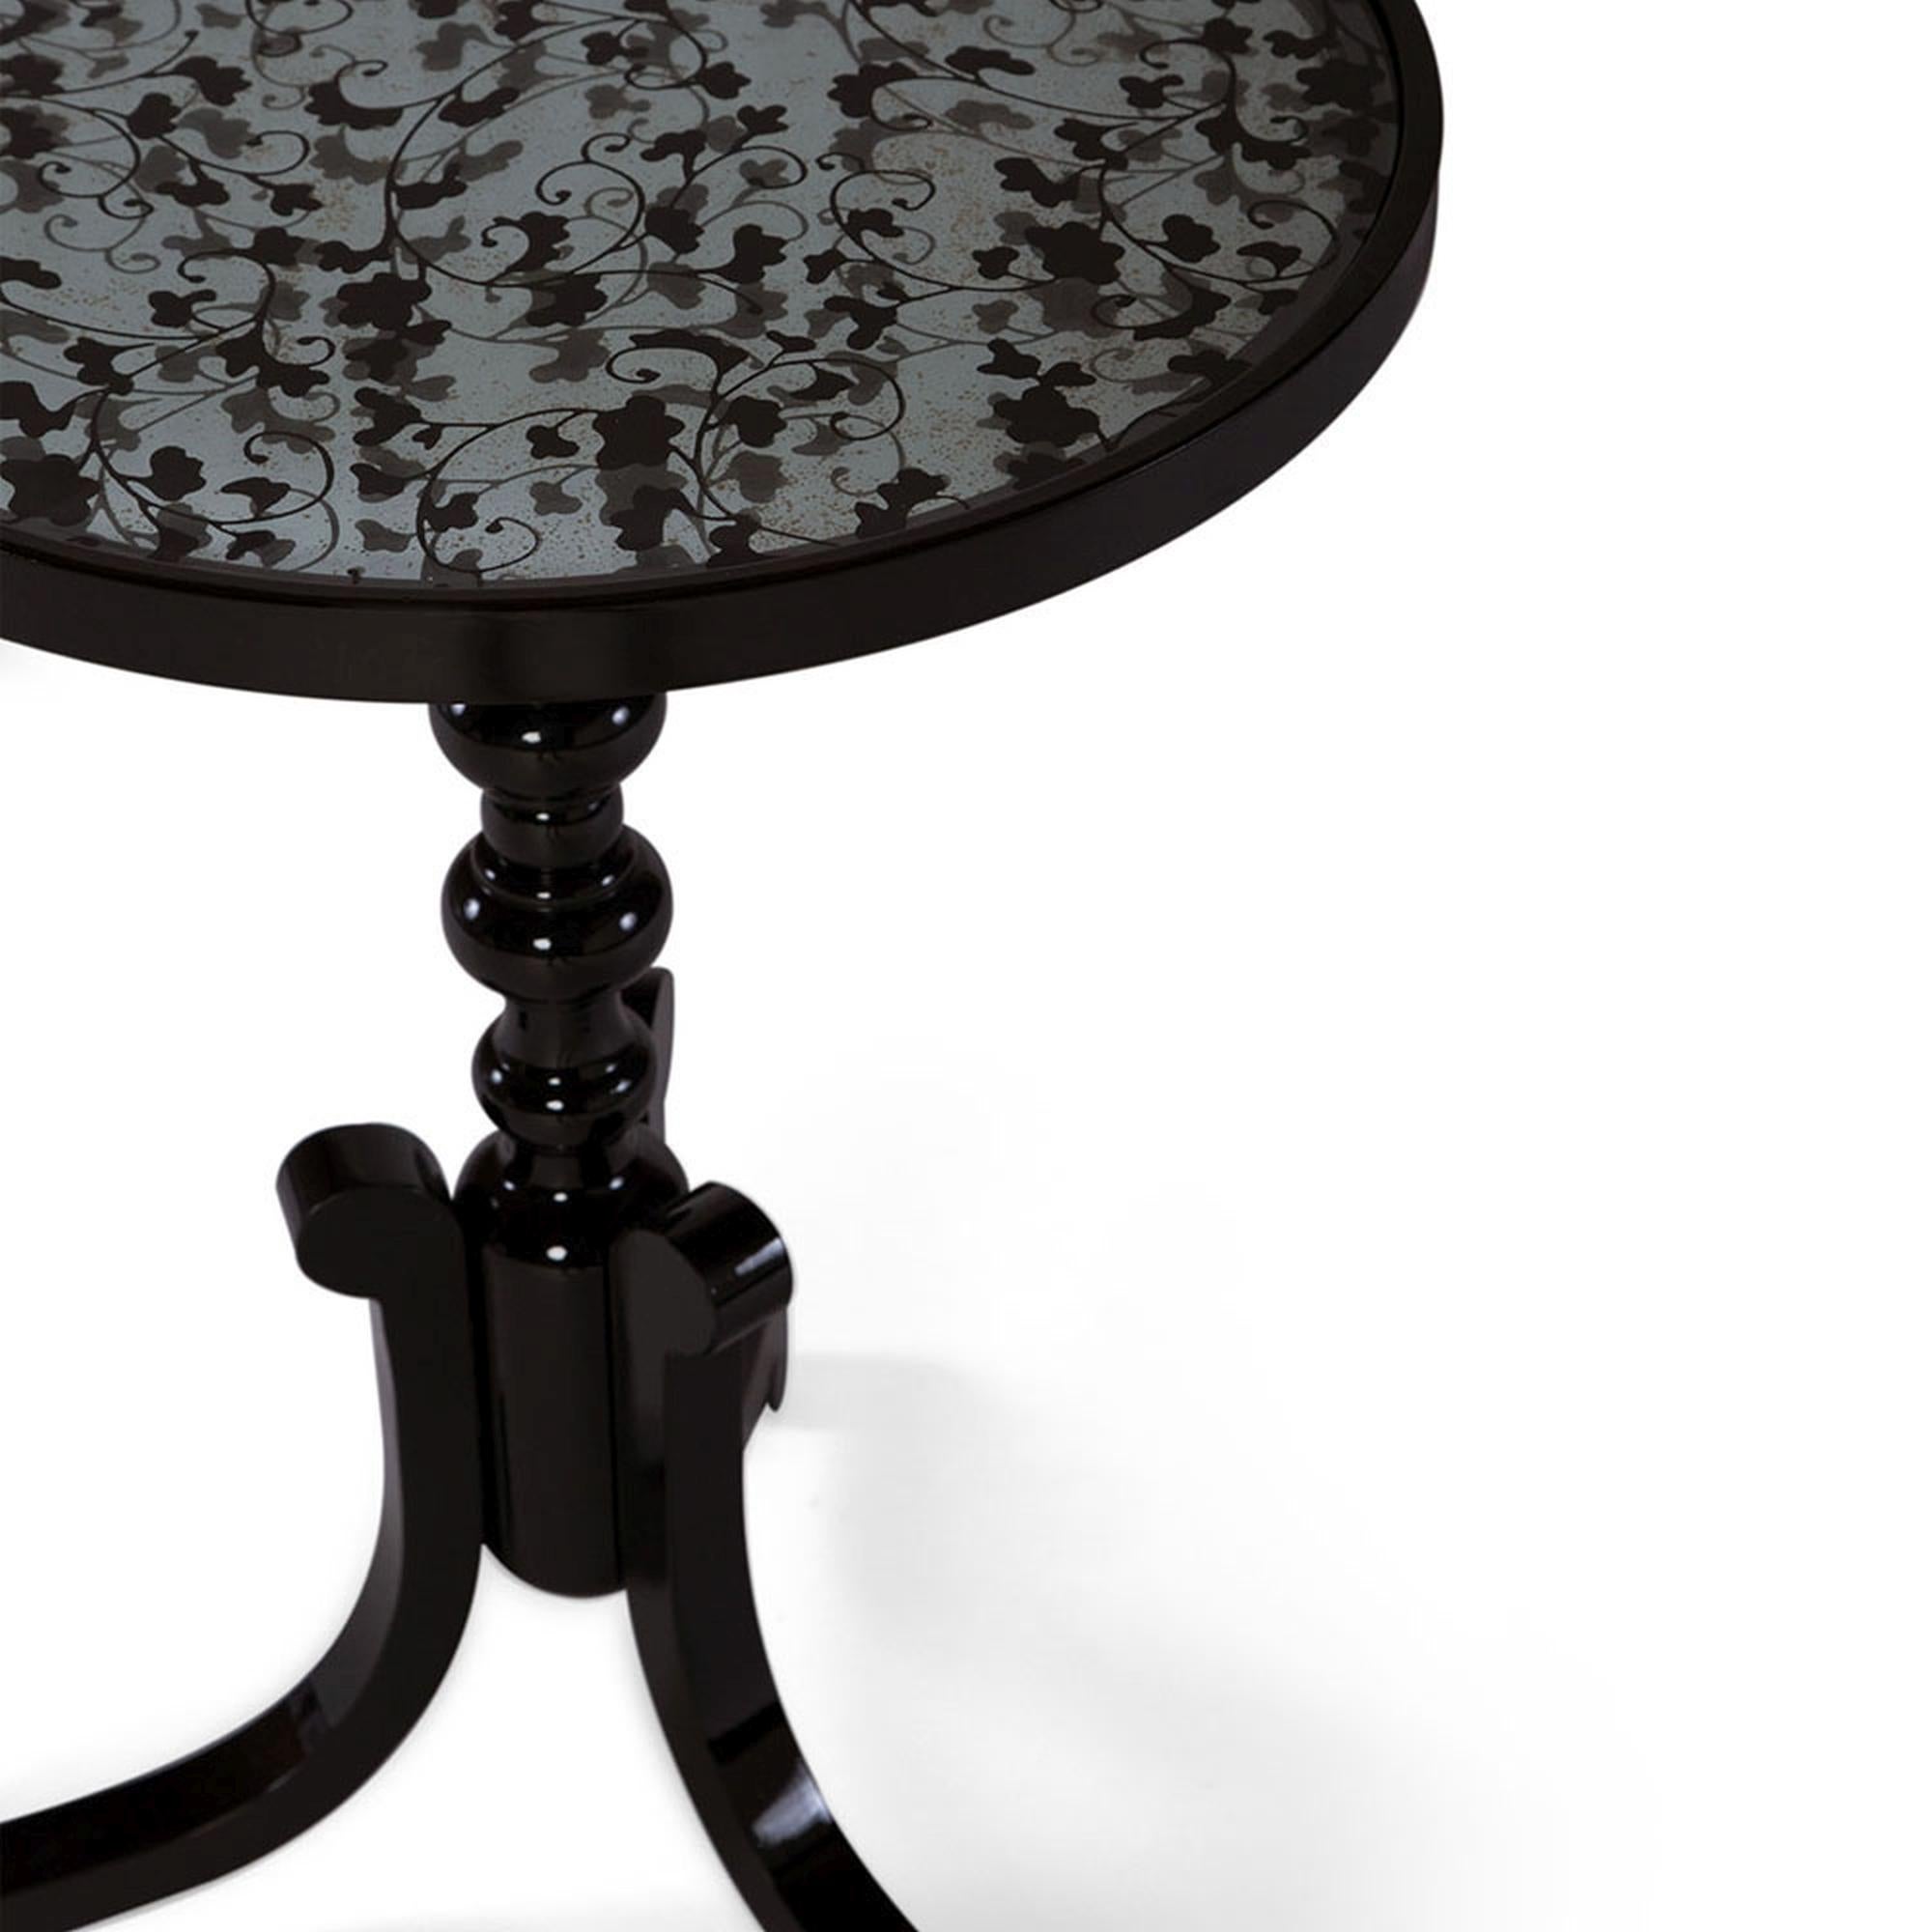 The Astaire accent table I is a delicately ornate and exquisite piece. This accent table includes a recessed antiqued mirror with an inset hand embellished black floral design on tempered glass. The turned leg is carved by hand. Due to the